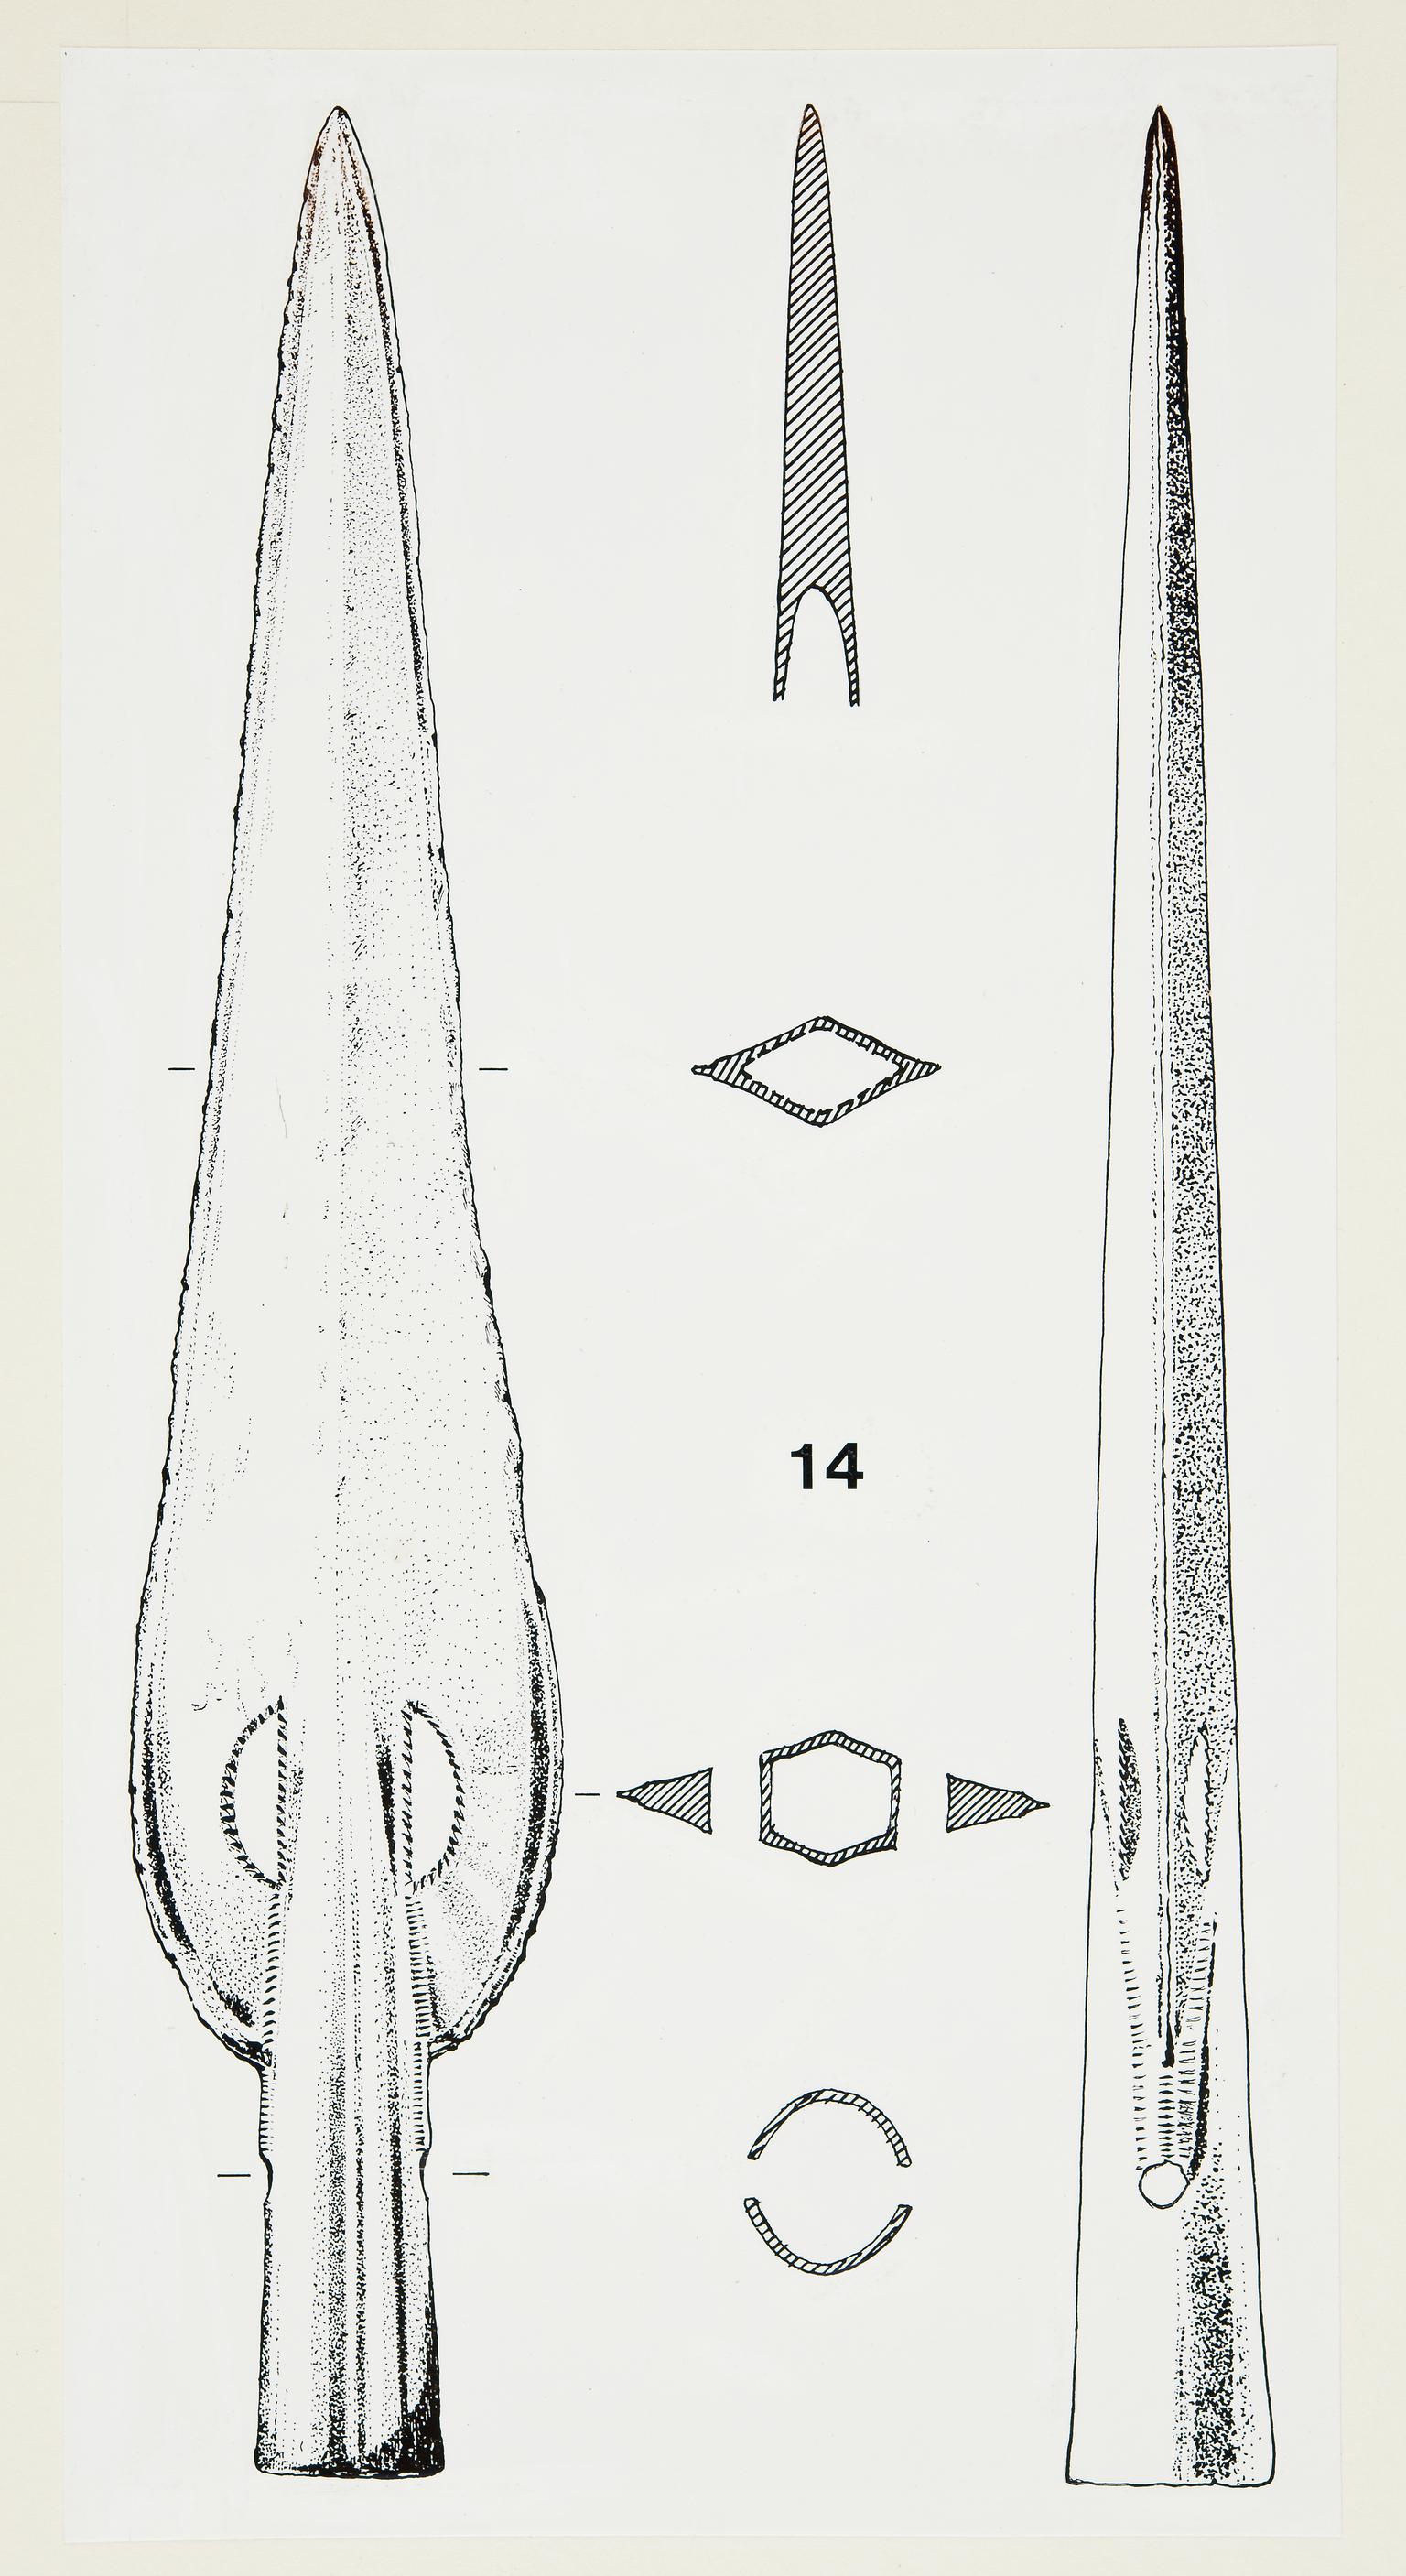 Late Bronze Age socketed spearhead